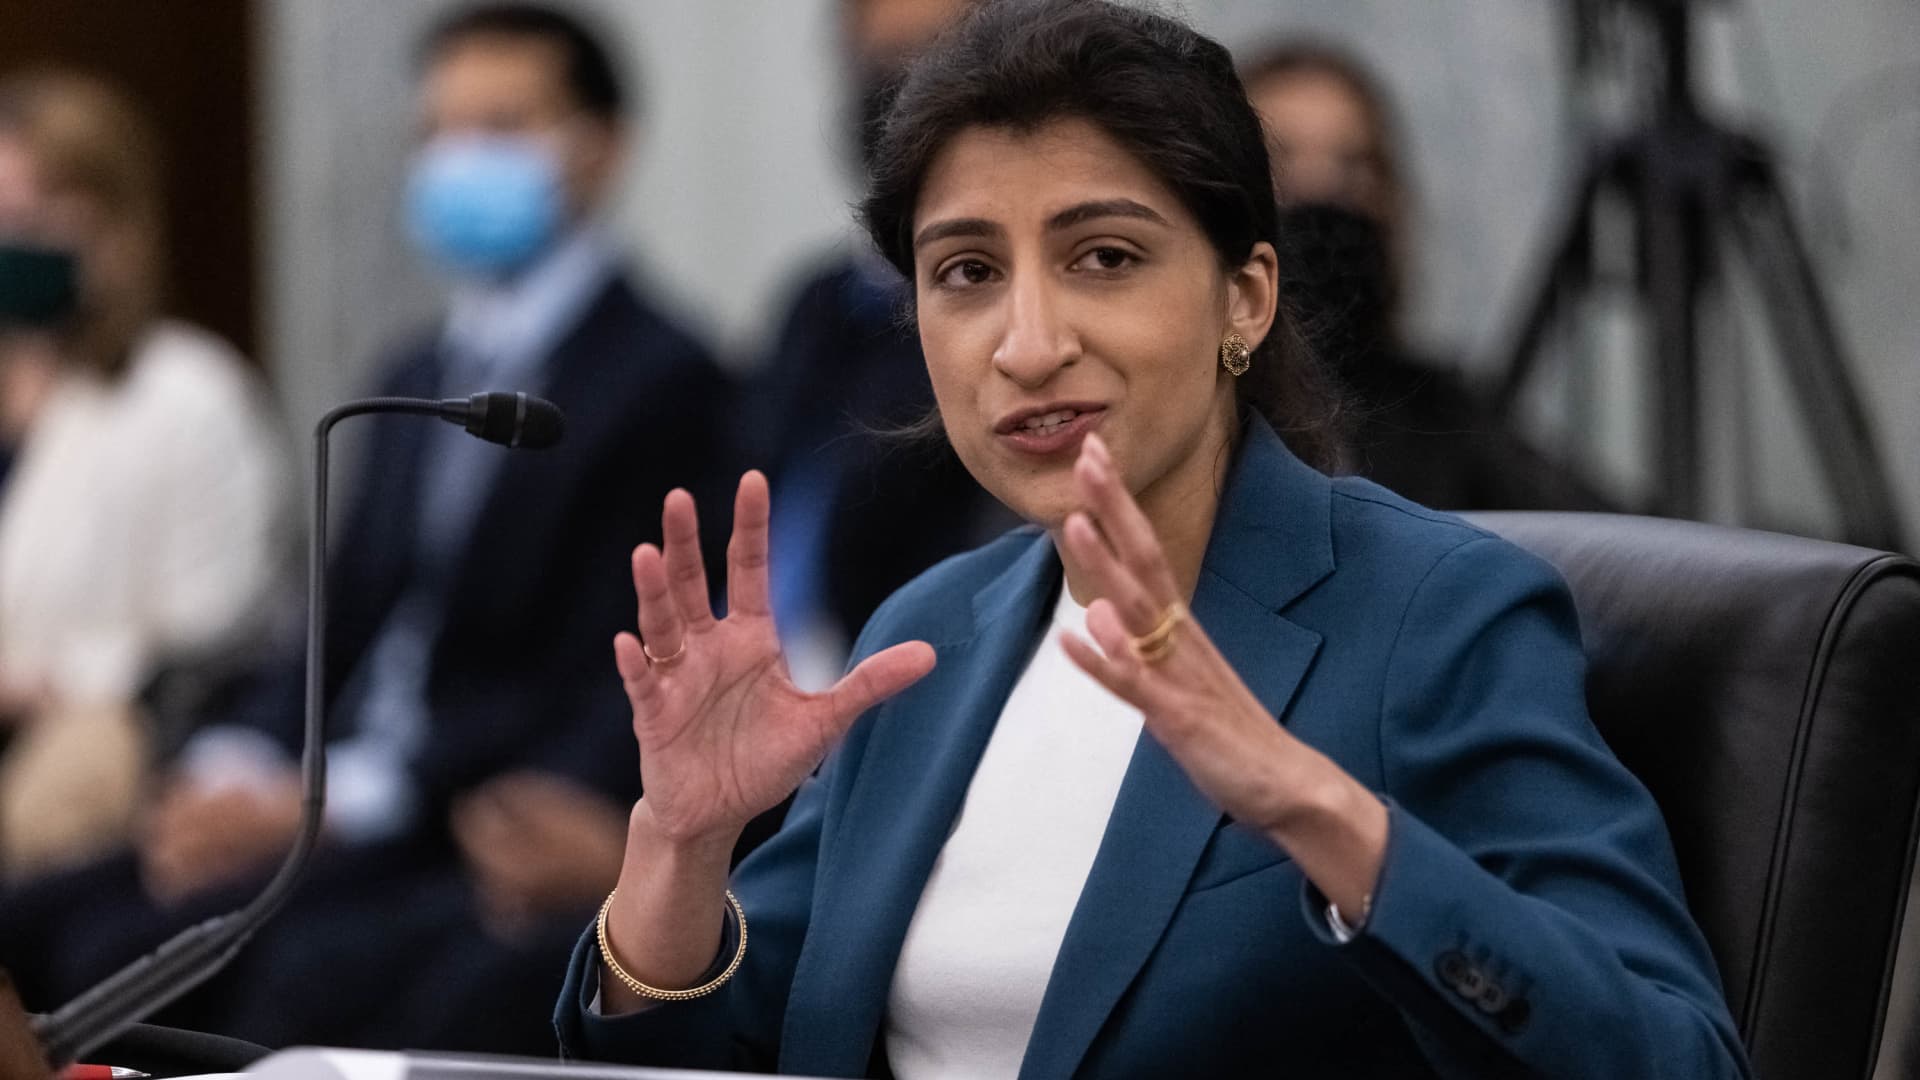 FTC Commissioner nominee Lina M. Khan testifies during a Senate Committee on Commerce, Science, and Transportation confirmation hearing on Capitol Hill in Washington, DC, April 21, 2021.